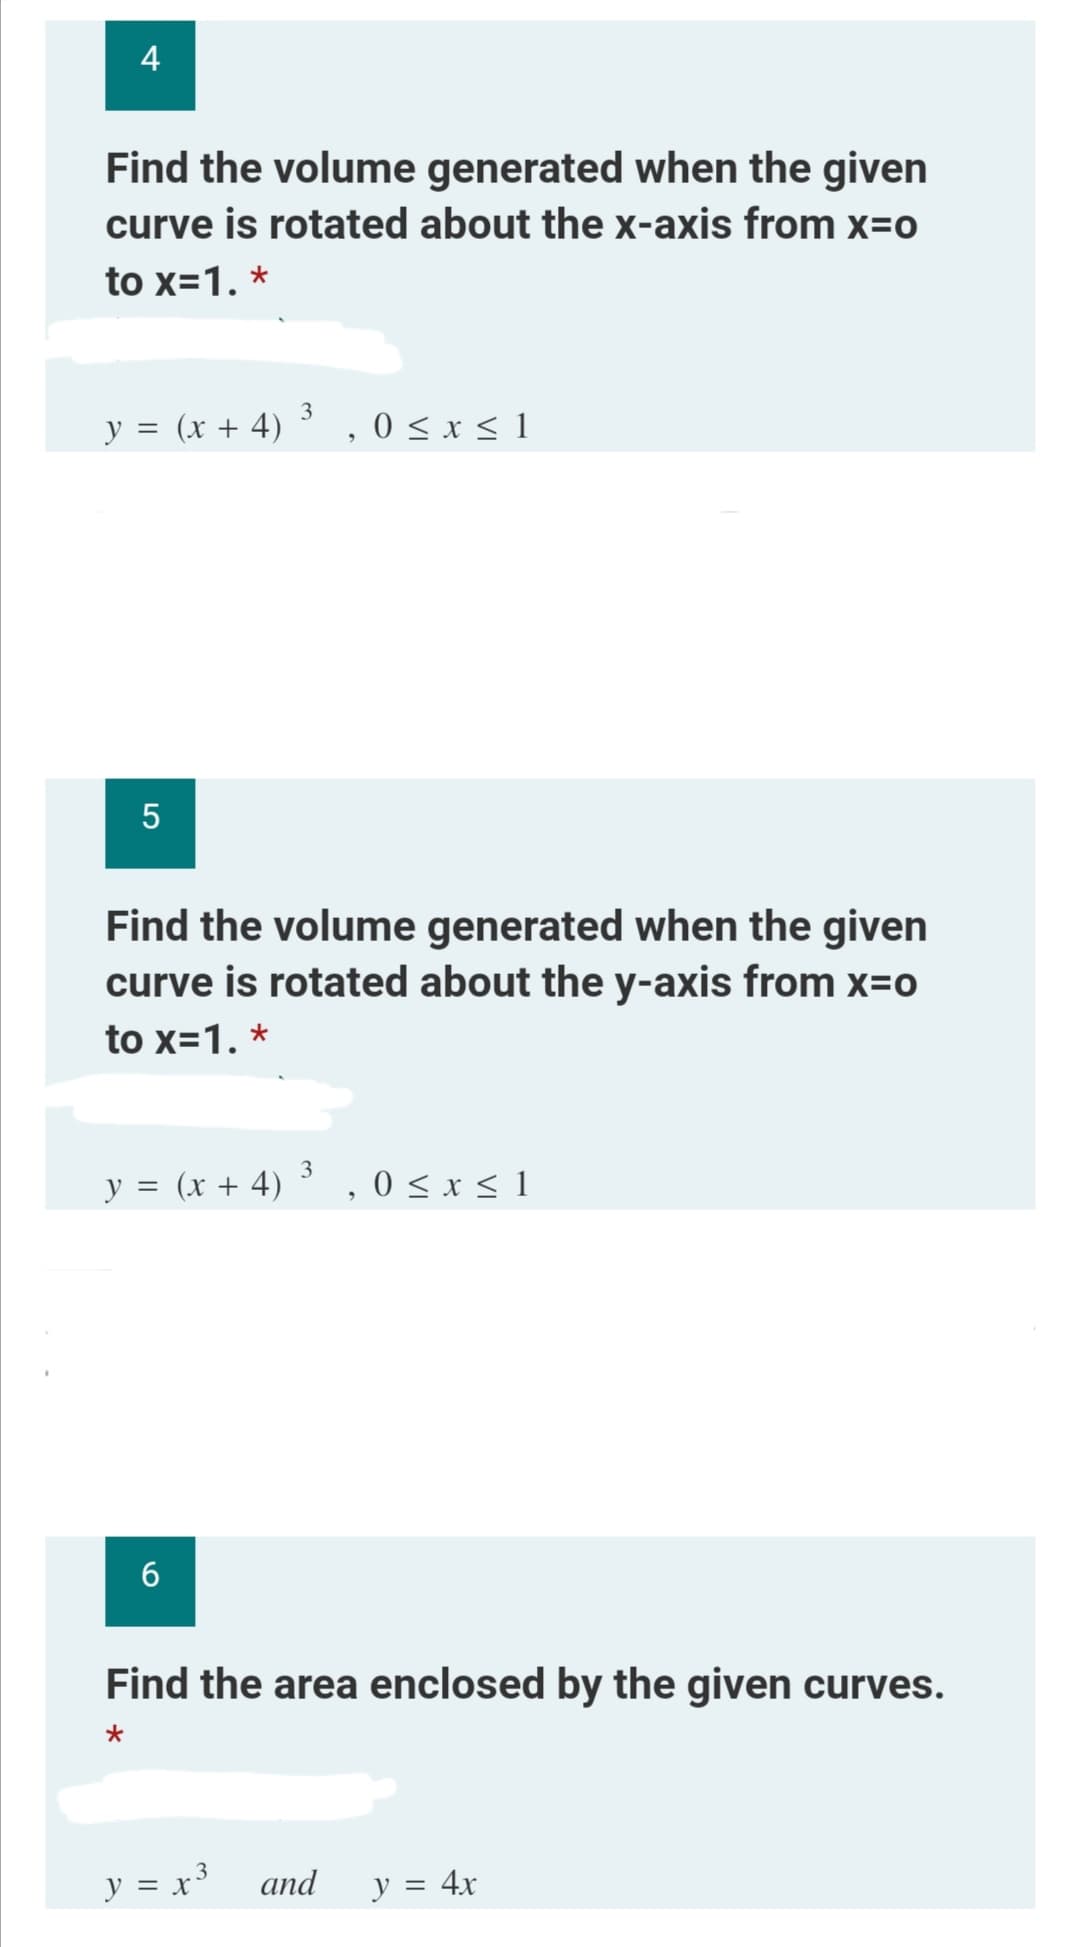 4
Find the volume generated when the given
curve is rotated about the x-axis from x=0
to x=1. *
3
y = (x + 4)
0 ≤ x ≤ 1
5
Find the volume generated when the given
curve is rotated about the y-axis from x=o
to x=1. *
3
y = (x + 4) ³,0 ≤ x ≤ 1
6
Find the area enclosed by the given curves.
*
3
y = x³ and
y = 4x